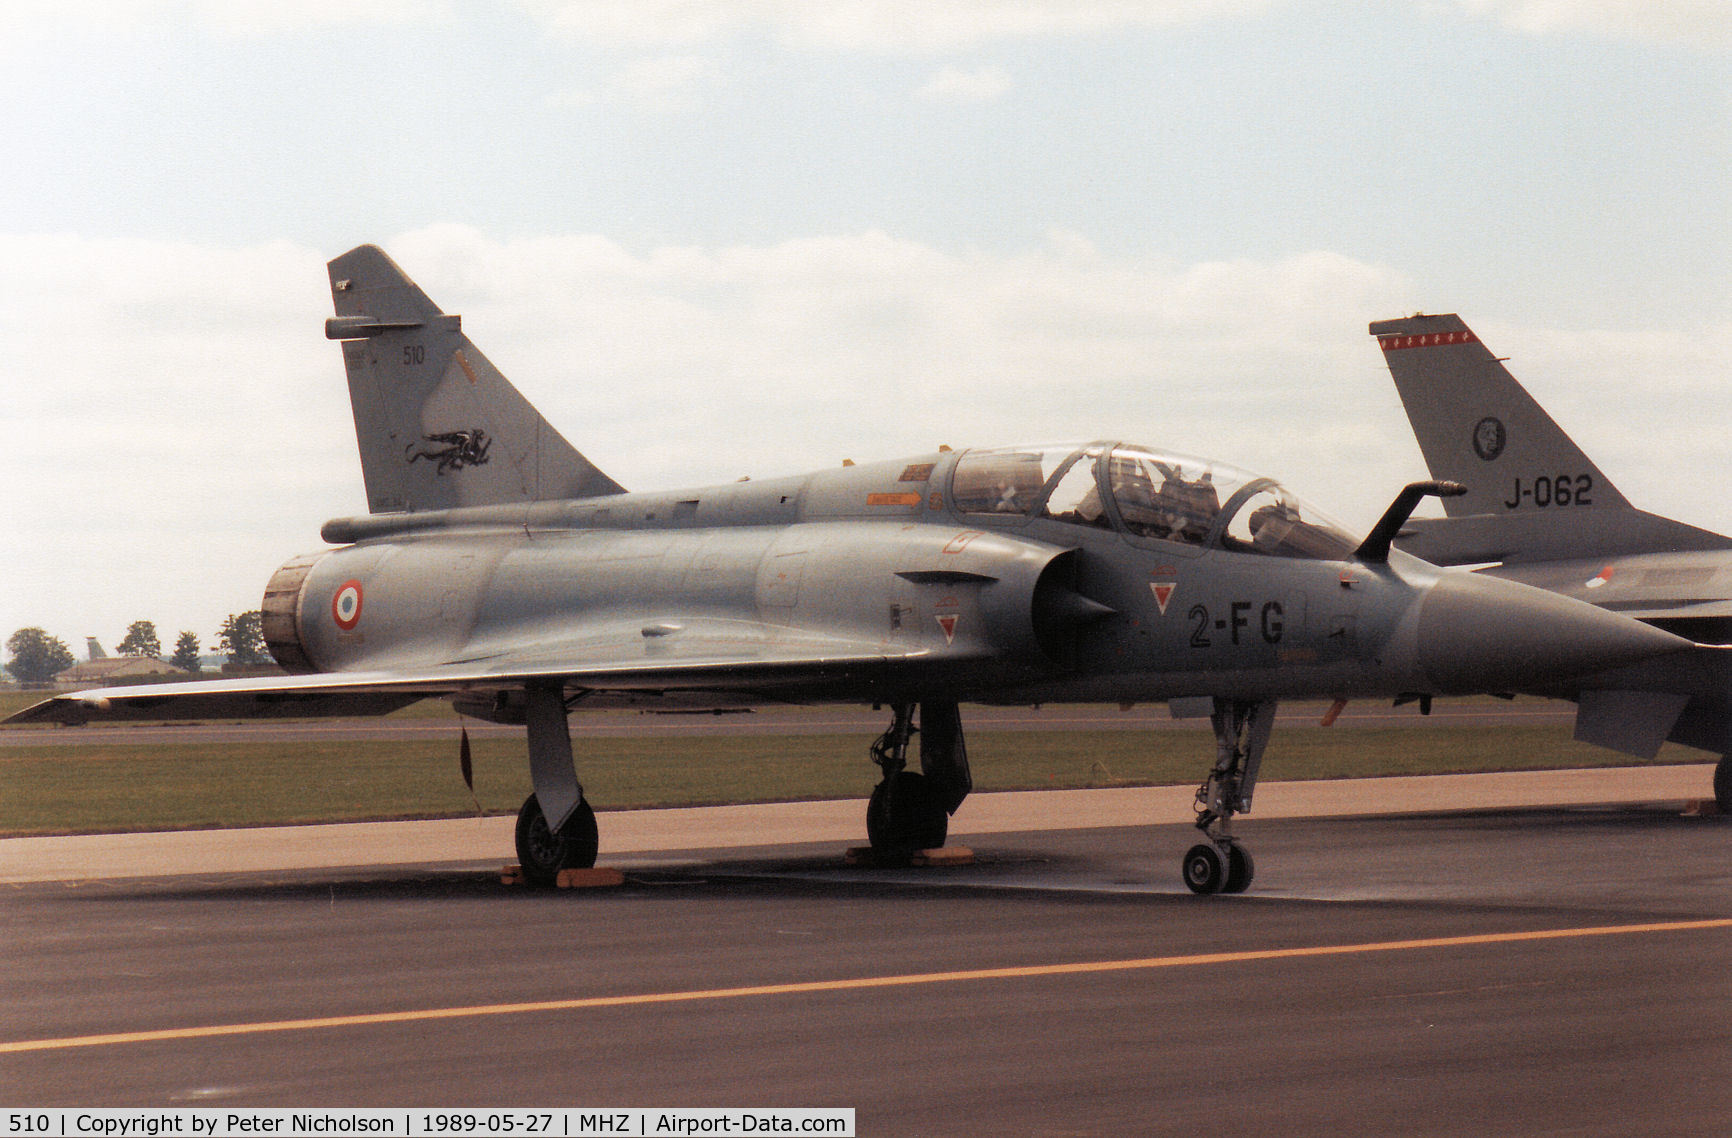 510, Dassault Mirage 2000B C/N 67, Mirage 2000B of French Air Force's EC 02.002 on the flight-line at the 1989 RAF Mildenhall Air Fete.